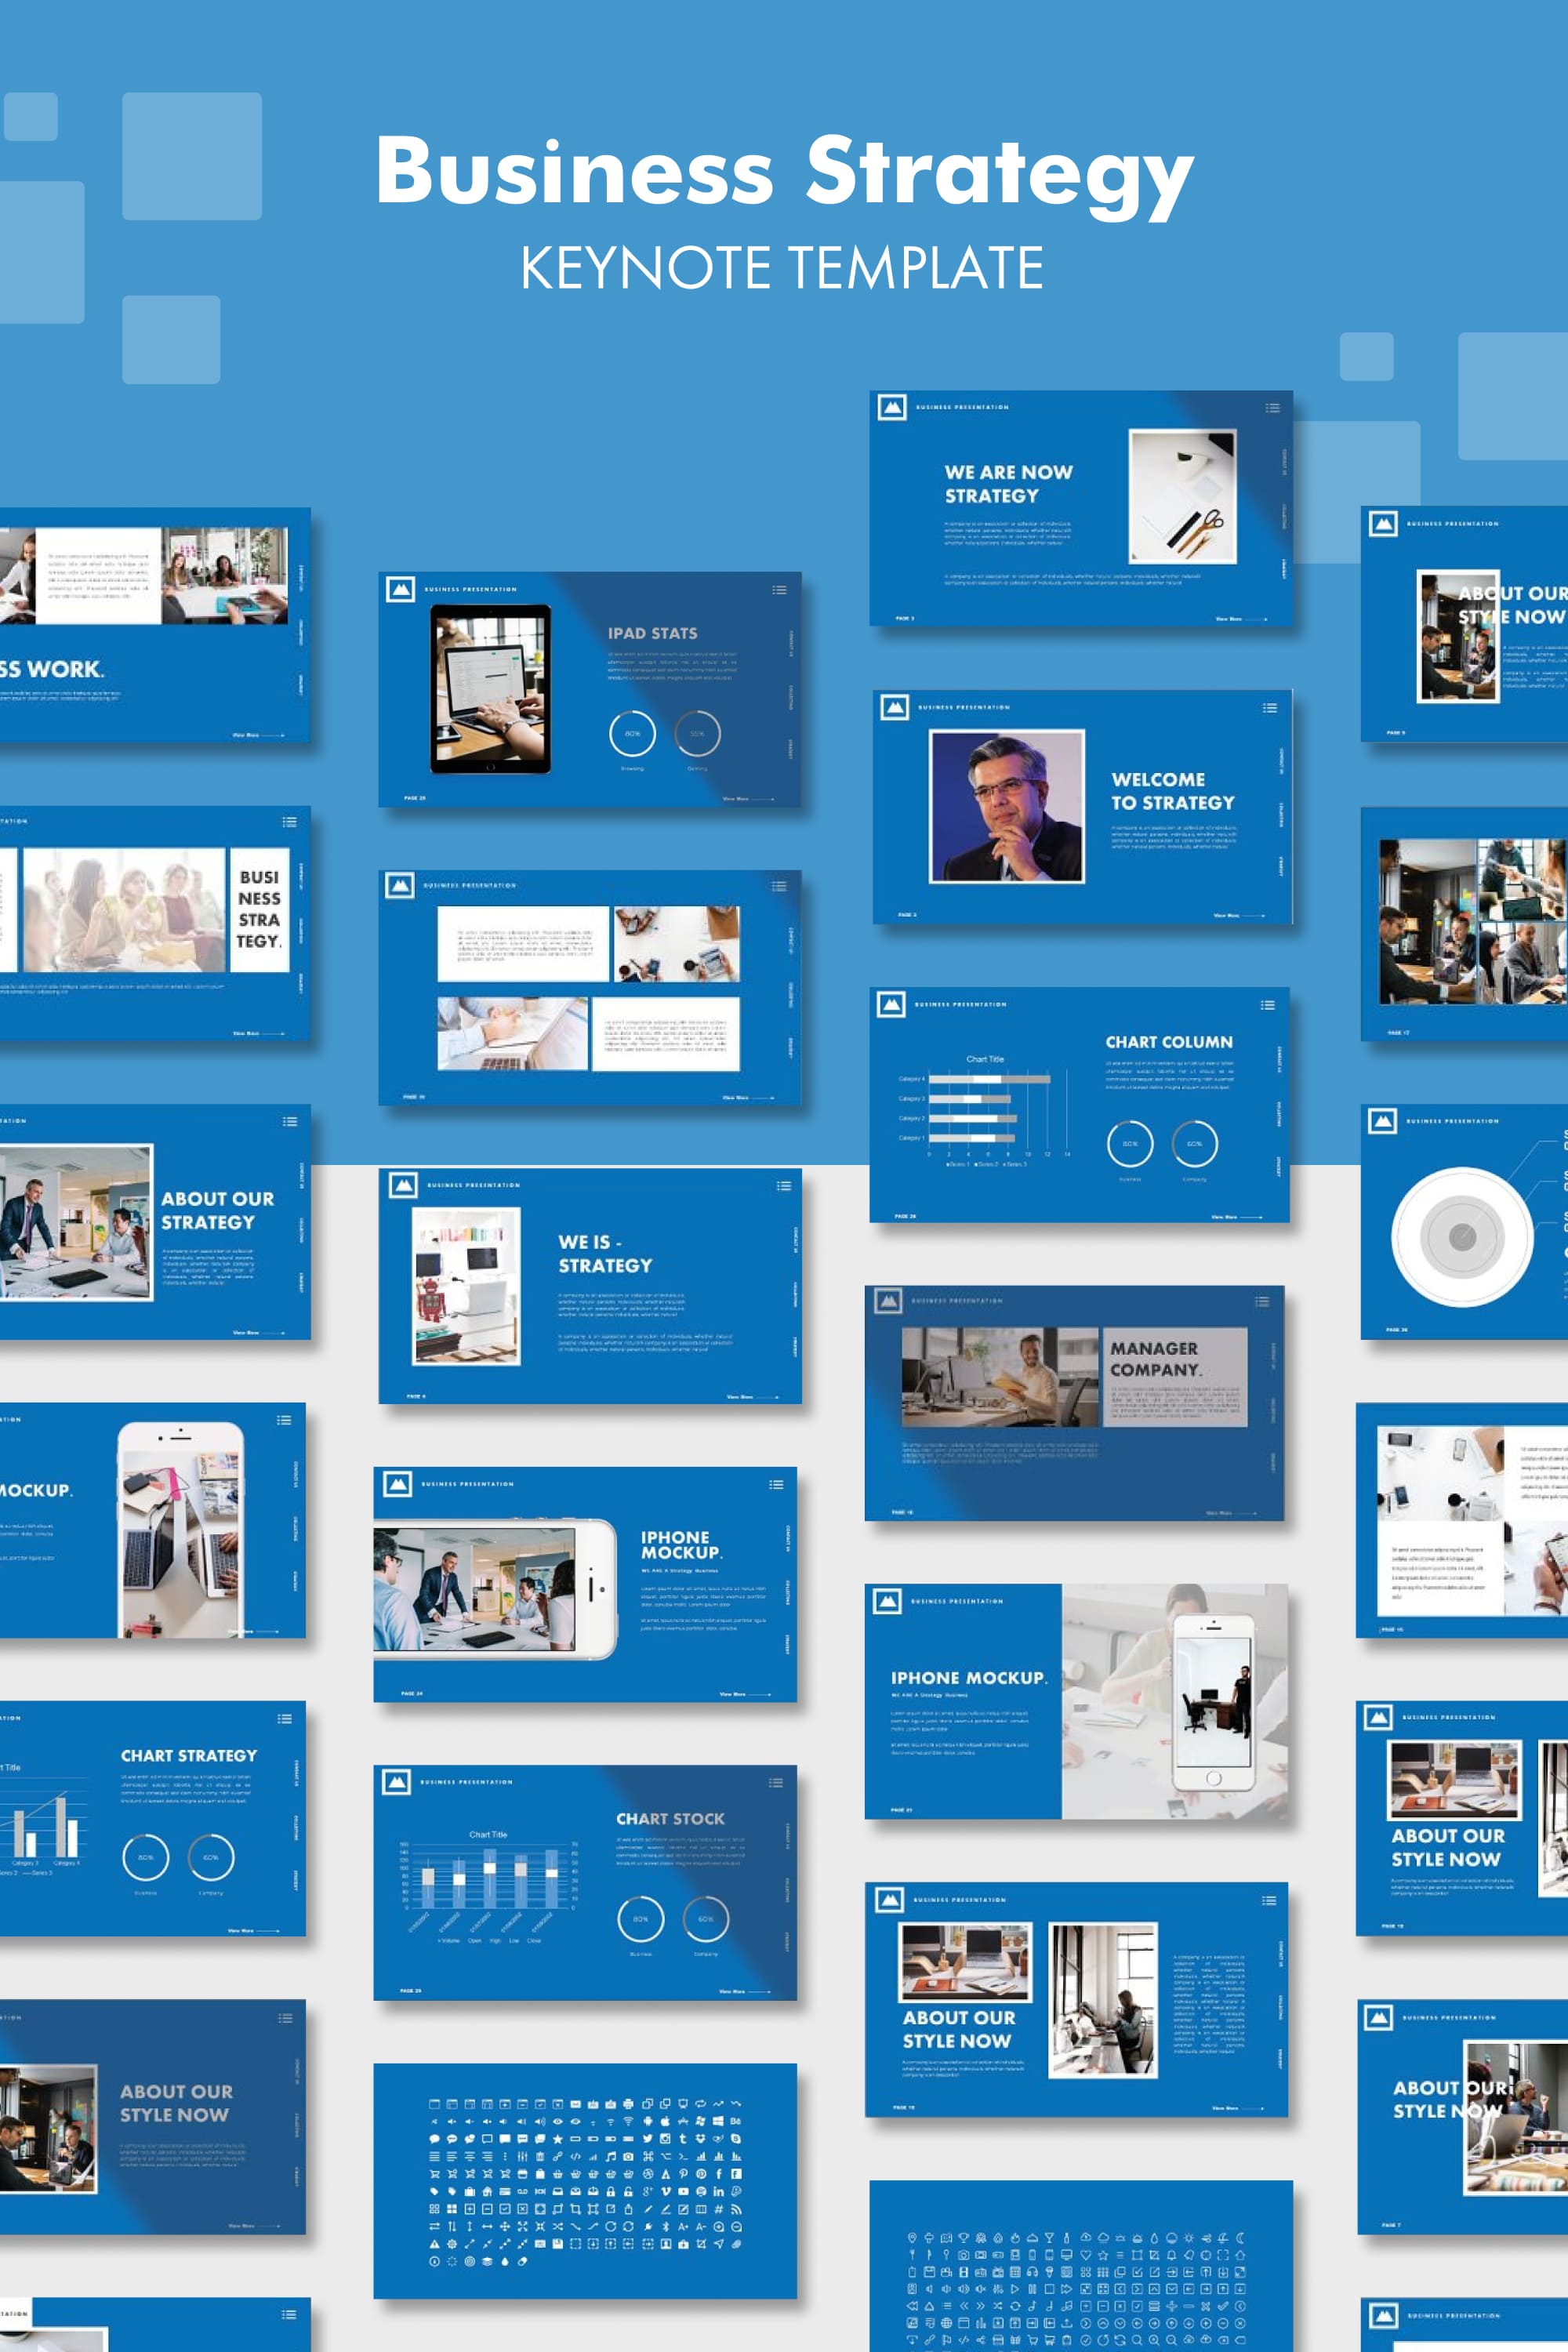 Strategy business keynote template - pinterest image preview.